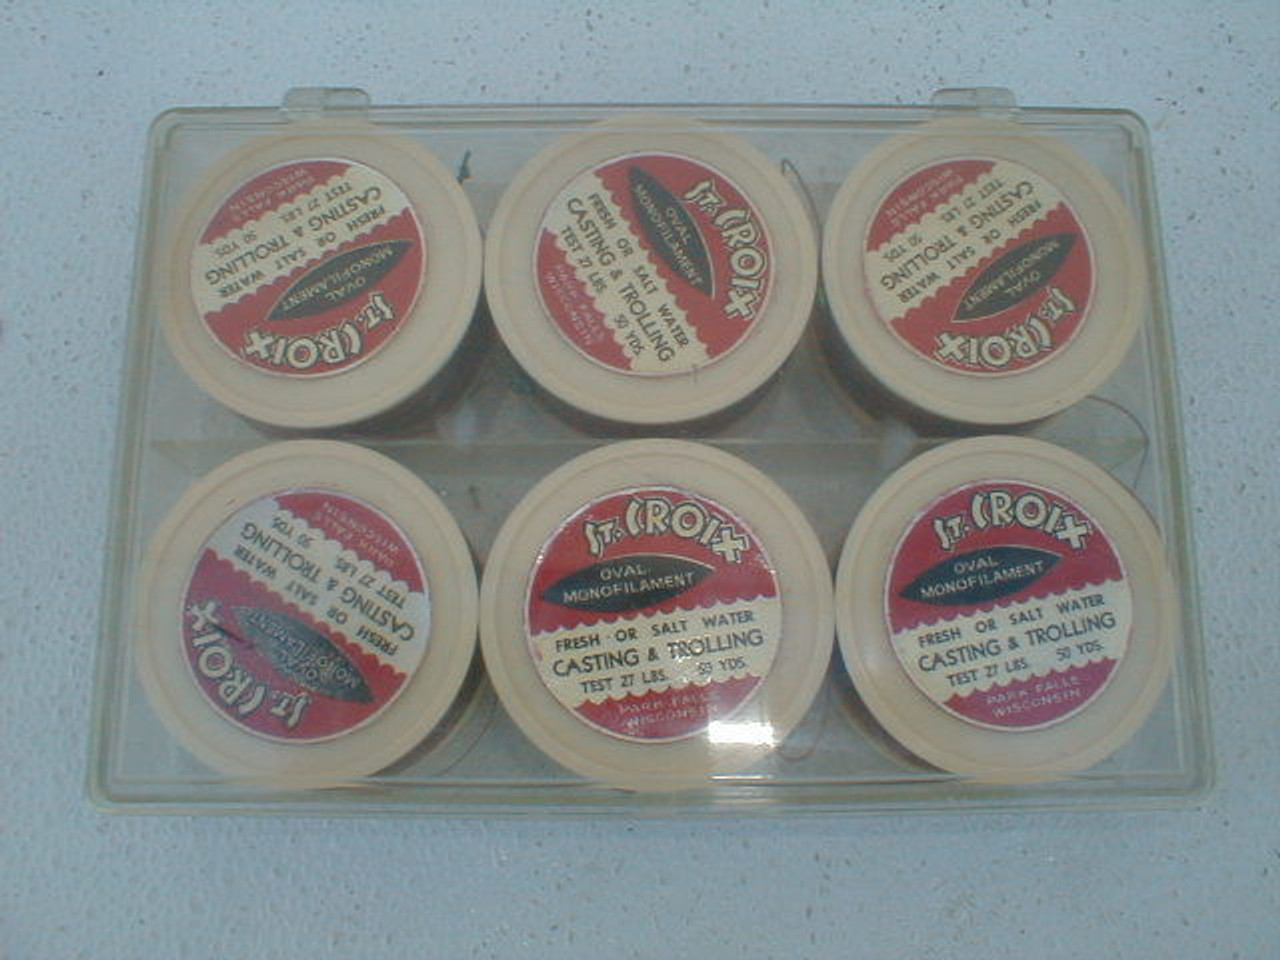 A six spool pack of vintage St. Croix of Park Falls,Wisconsin